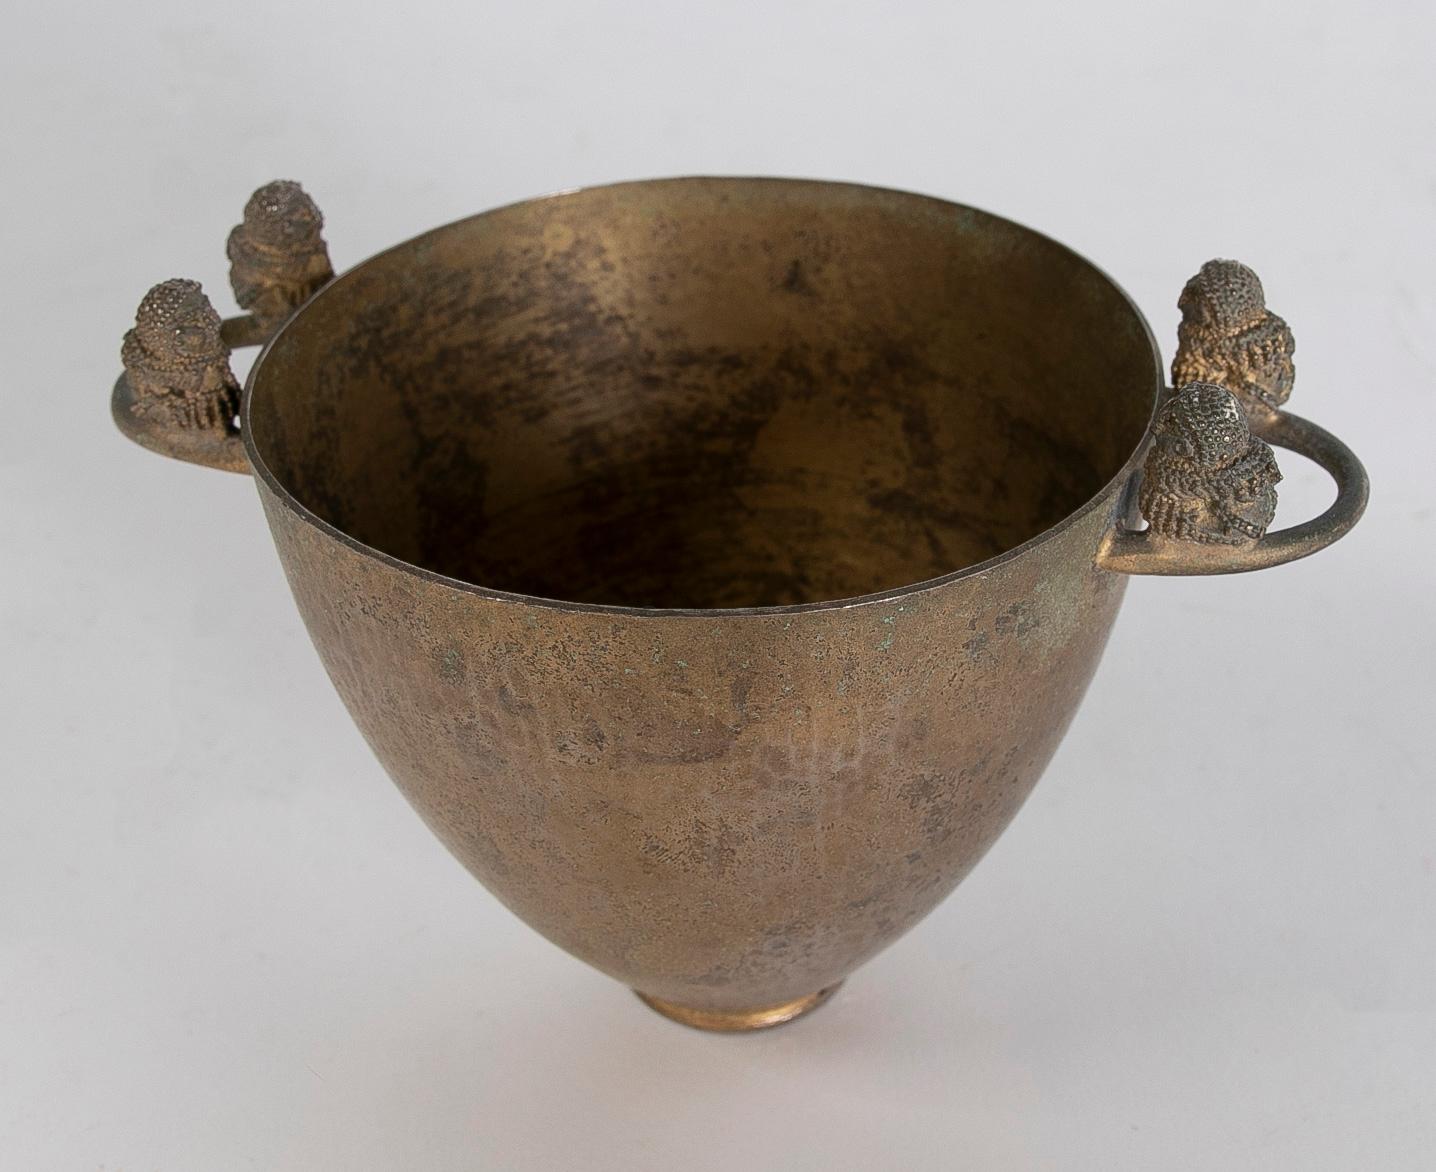 Asian Oriental Bronze Vessel with Handles on the Sides